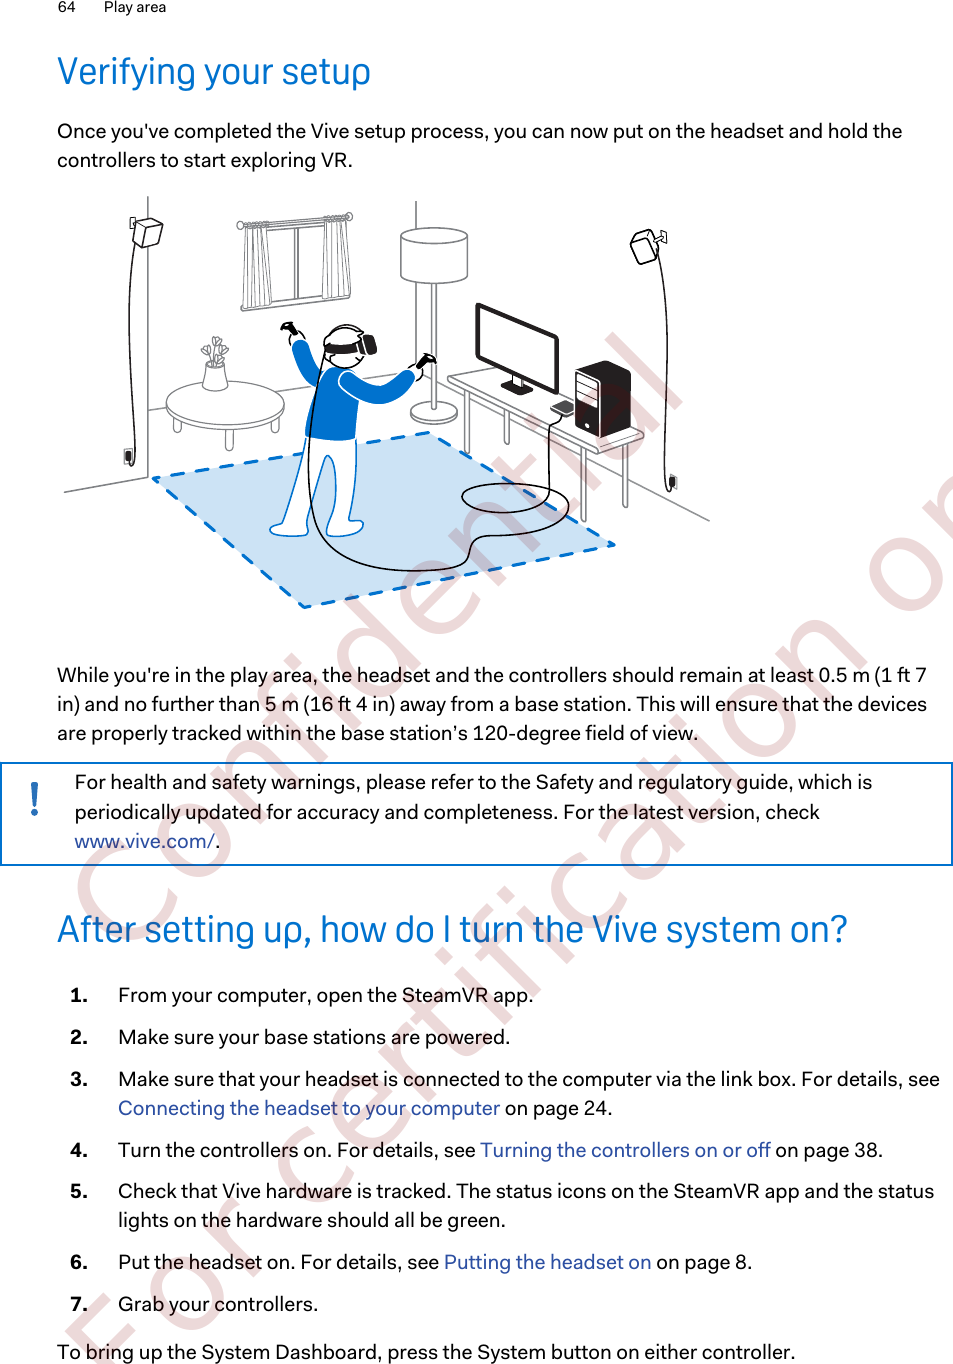 Verifying your setupOnce you&apos;ve completed the Vive setup process, you can now put on the headset and hold thecontrollers to start exploring VR.While you&apos;re in the play area, the headset and the controllers should remain at least 0.5 m (1 ft 7in) and no further than 5 m (16 ft 4 in) away from a base station. This will ensure that the devicesare properly tracked within the base station’s 120-degree field of view.For health and safety warnings, please refer to the Safety and regulatory guide, which isperiodically updated for accuracy and completeness. For the latest version, check www.vive.com/.After setting up, how do I turn the Vive system on?1. From your computer, open the SteamVR app.2. Make sure your base stations are powered.3. Make sure that your headset is connected to the computer via the link box. For details, see Connecting the headset to your computer on page 24.4. Turn the controllers on. For details, see Turning the controllers on or off on page 38.5. Check that Vive hardware is tracked. The status icons on the SteamVR app and the statuslights on the hardware should all be green.6. Put the headset on. For details, see Putting the headset on on page 8.7. Grab your controllers.To bring up the System Dashboard, press the System button on either controller.64 Play area        Confidential  For certification only